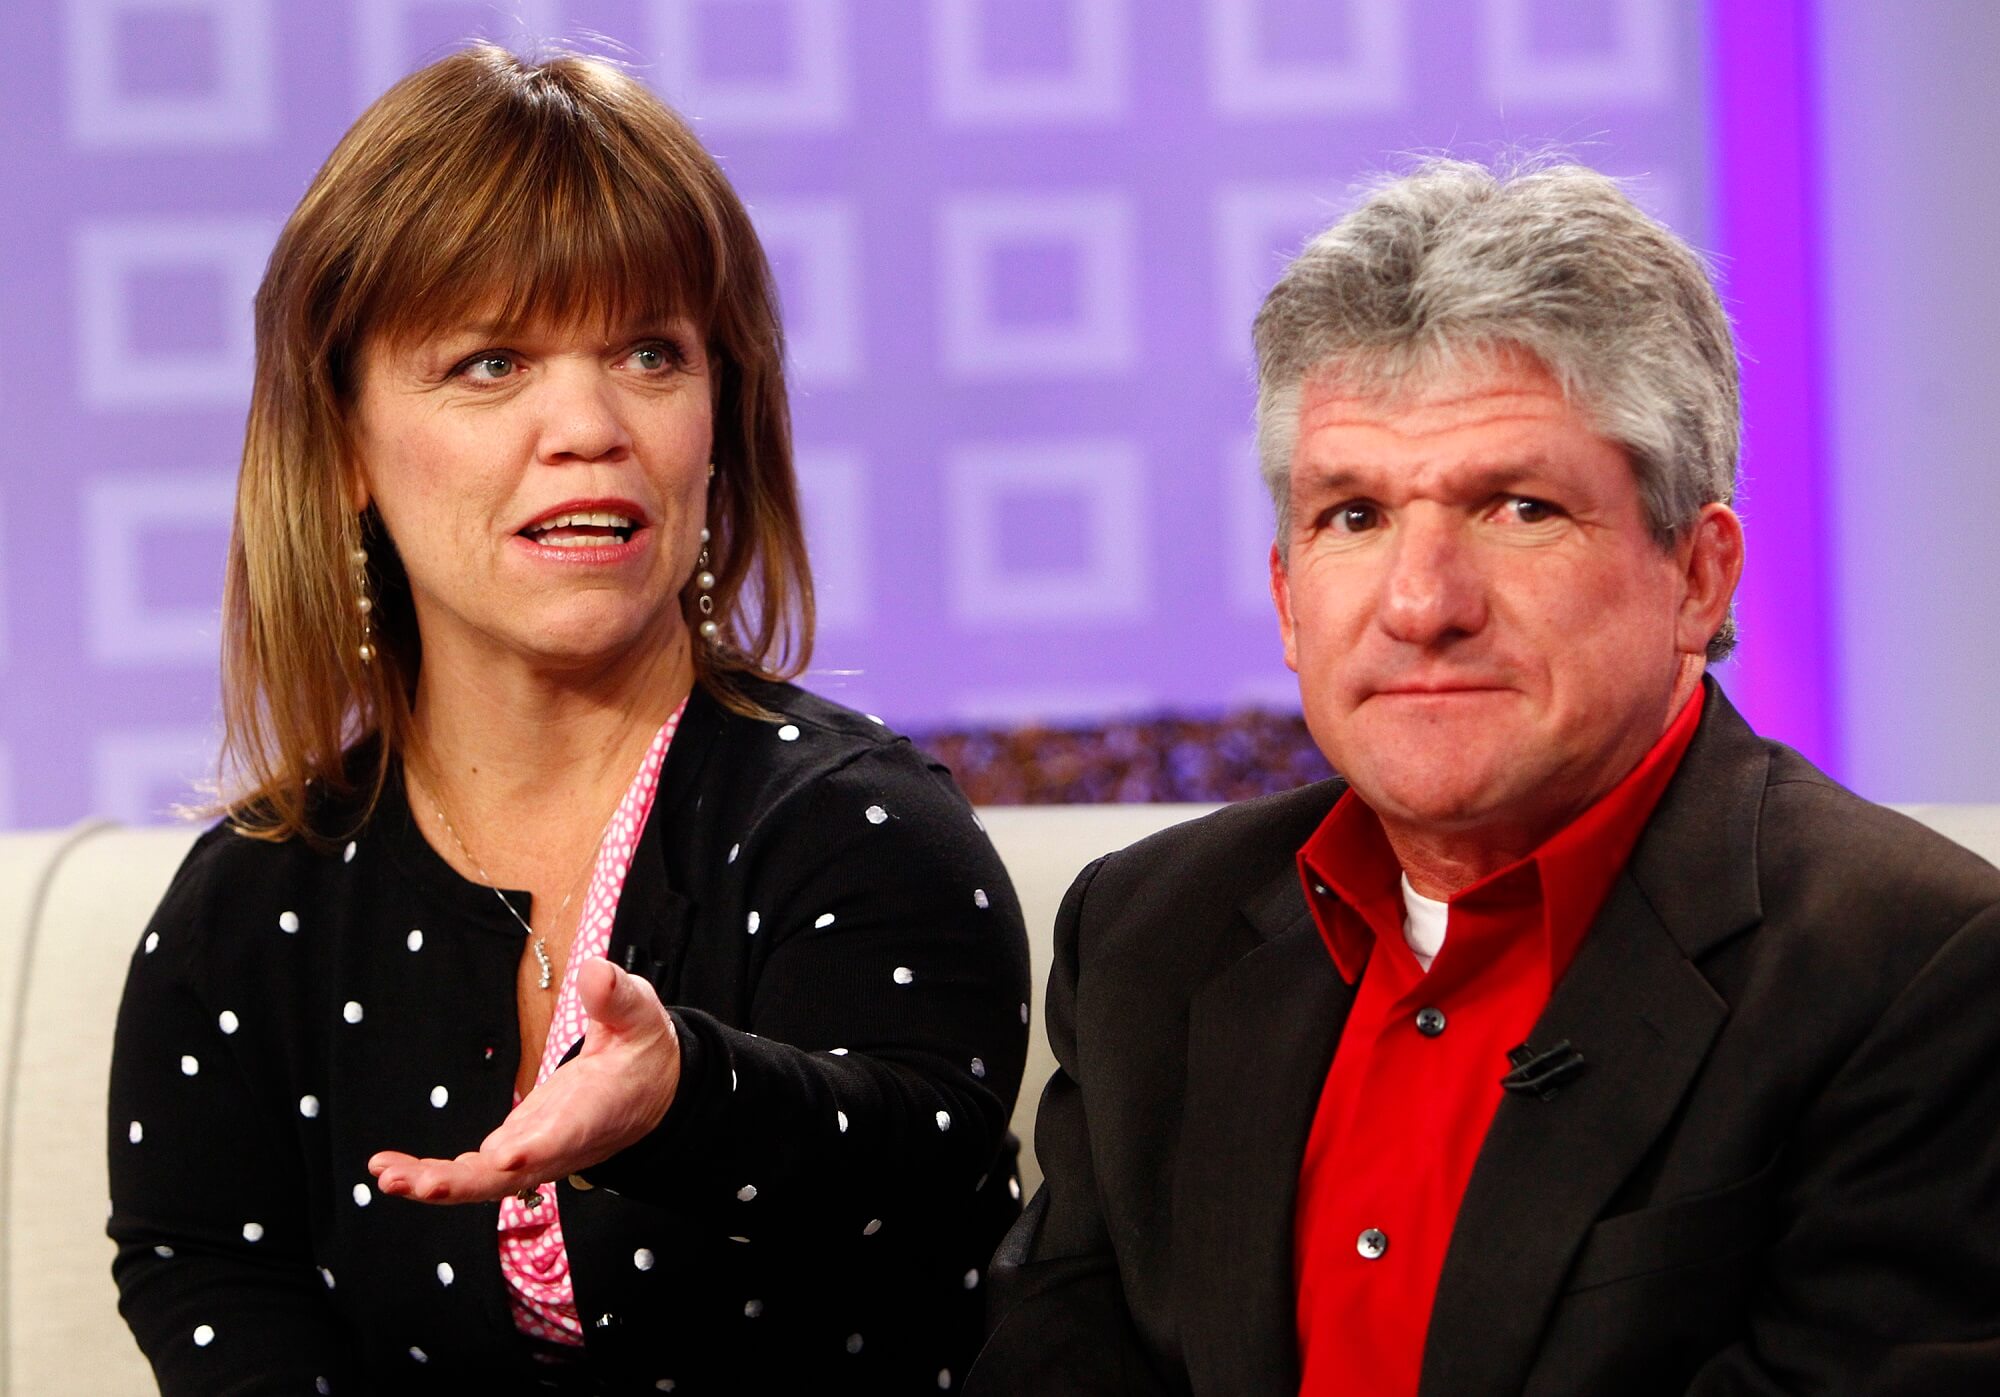 Amy Roloff and Matt Roloff of 'Little People, Big World' sit side-by-side